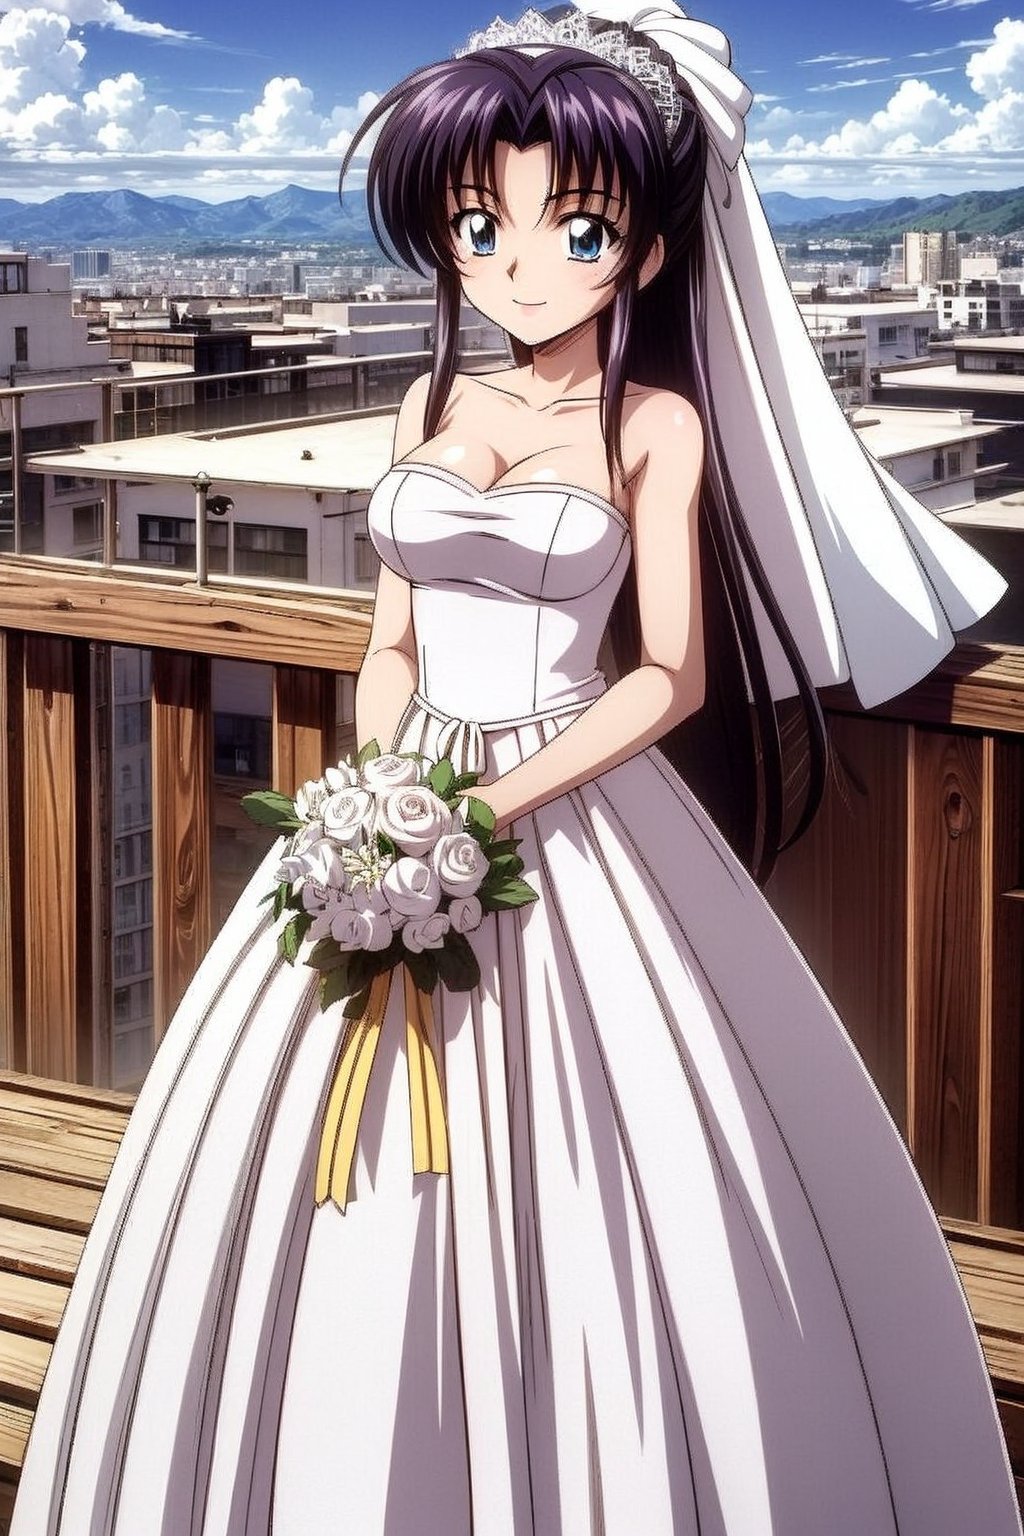 Kaimya kaoru 1996,beautiful 20 year old anime girl with: athletic body, long legs, (properly proportioned female body) , medium bust, blue eyes, black long hair tied in a ponytail; wearing a wedding dress with lace, seethrought lace veil; smiling shyly, flowers in the hands; stop in half the city; in high quality, ,lace_pattern